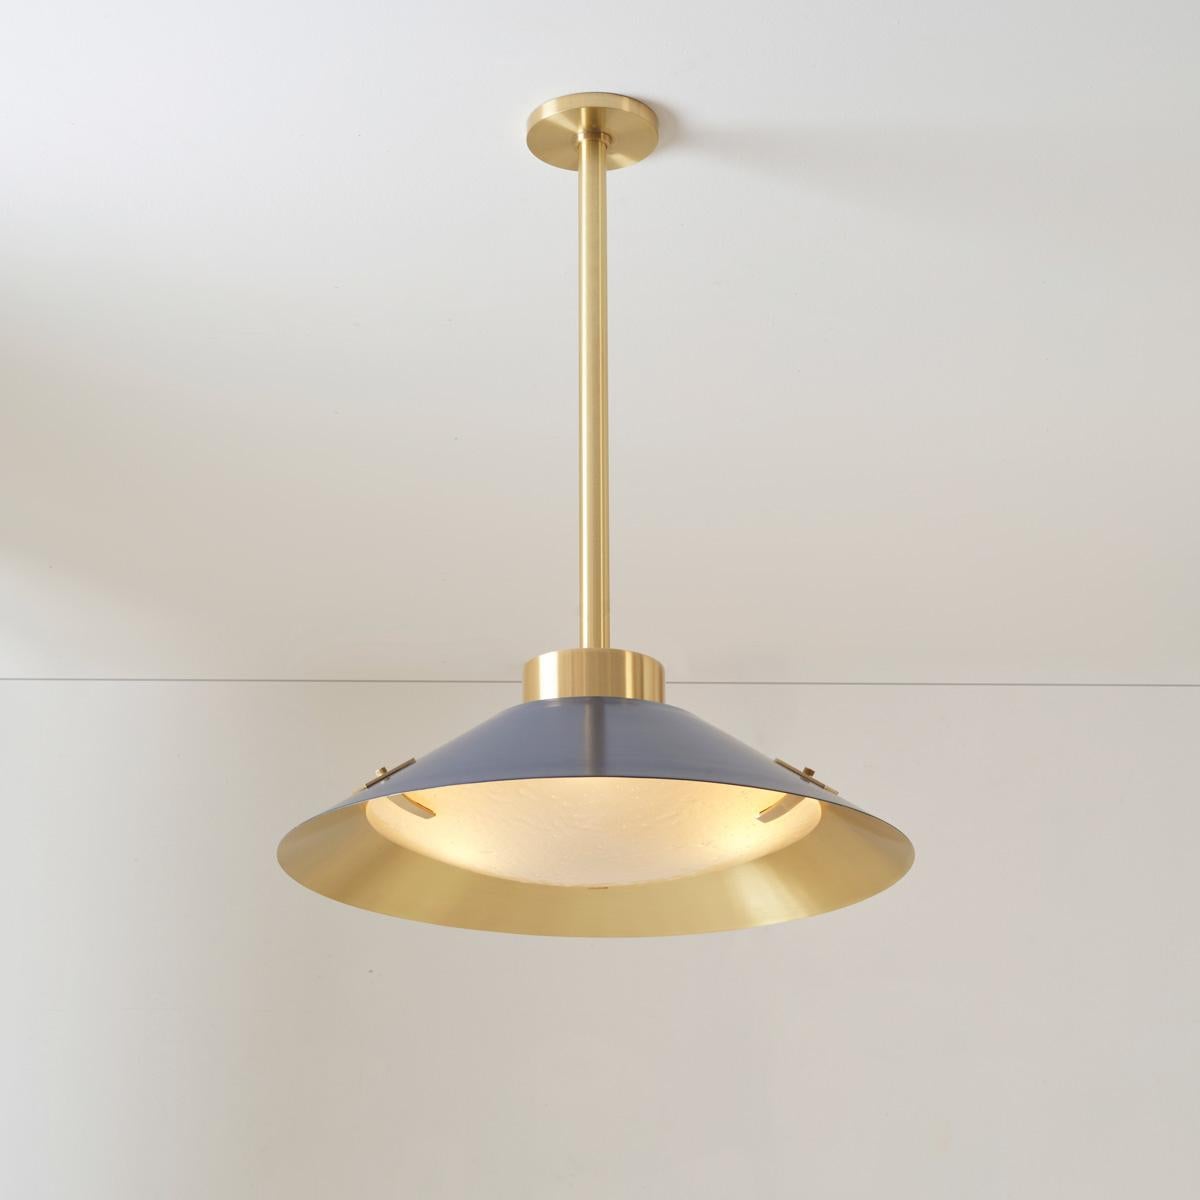 Kono Pendant by Gaspare Asaro. Satin Brass and Stone Grey For Sale 4